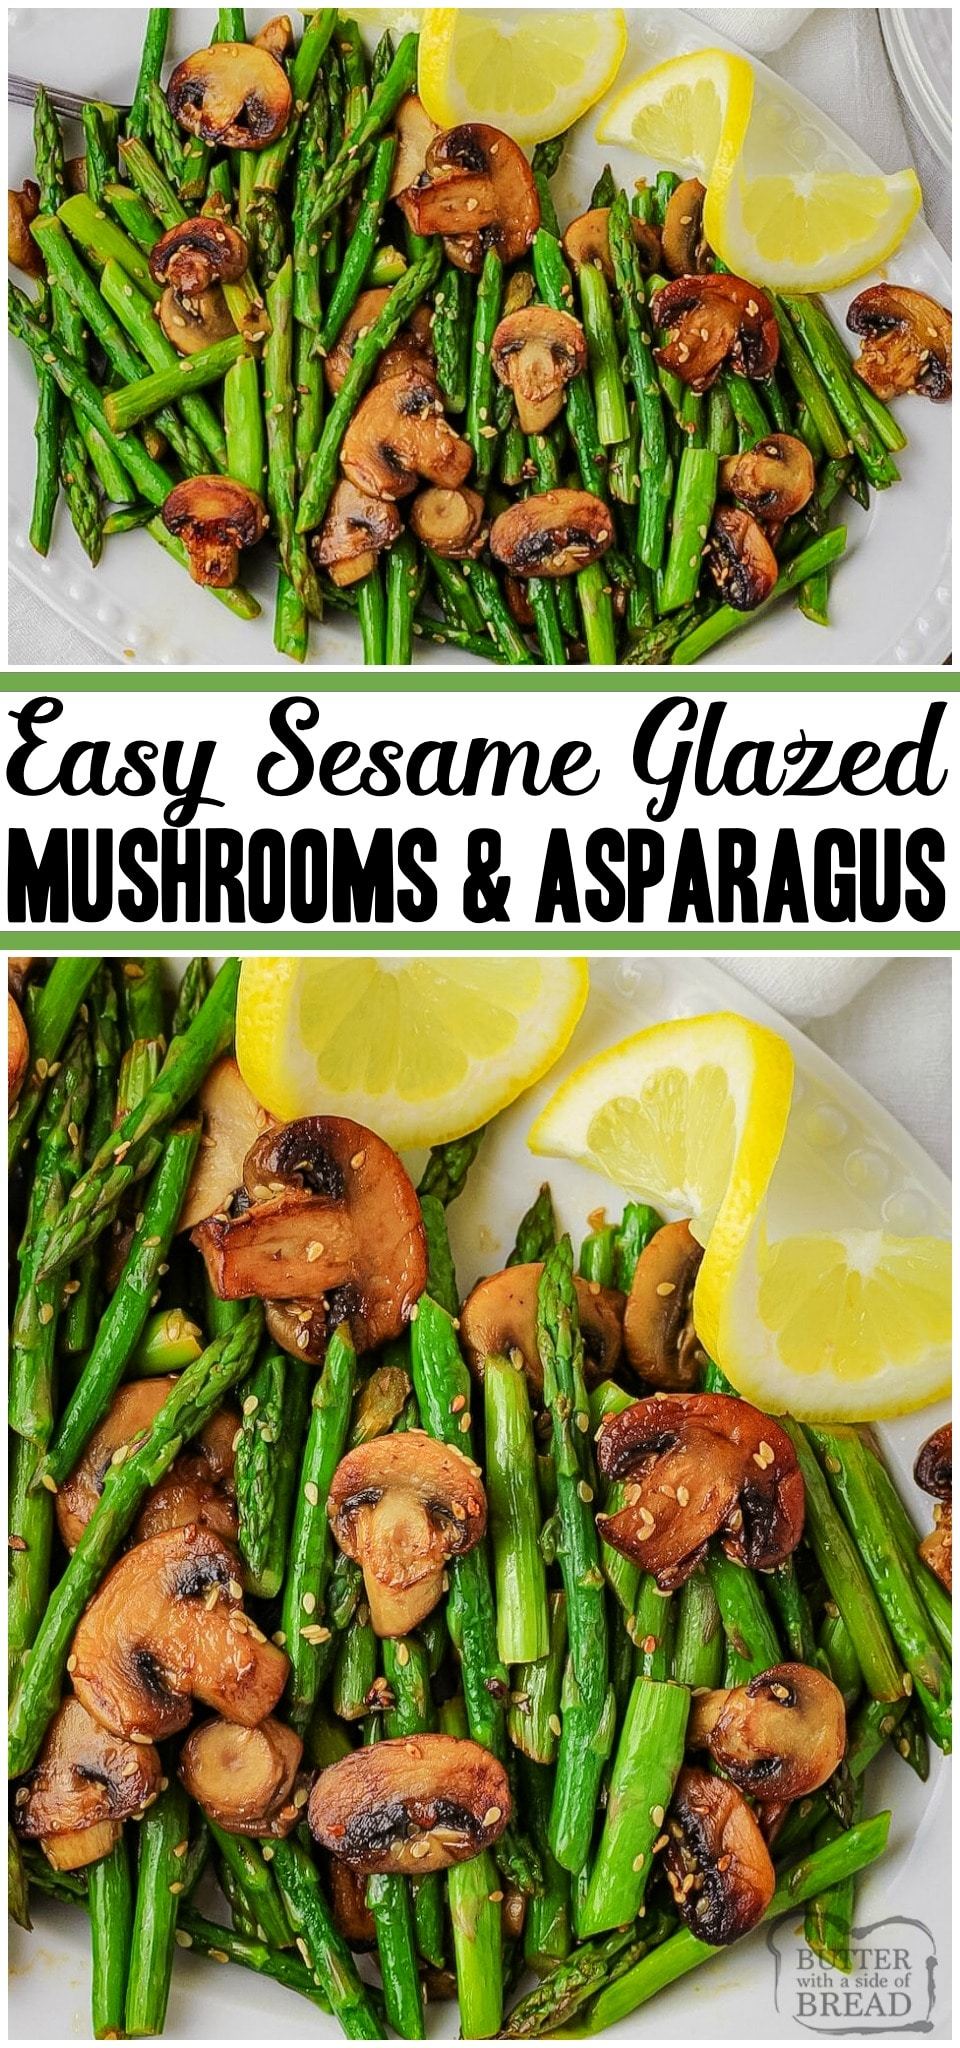 Sesame Mushrooms & Asparagus is a delicious vegetable side dish with a hint of lemon and sesame oil that adds awesome flavor. This simple asparagus recipe only has 7 ingredients and can be sautéed or grilled. #vegetables #mushrooms #asparagus #sesame #lemon #healthy #recipe from BUTTER WITH A SIDE OF BREAD